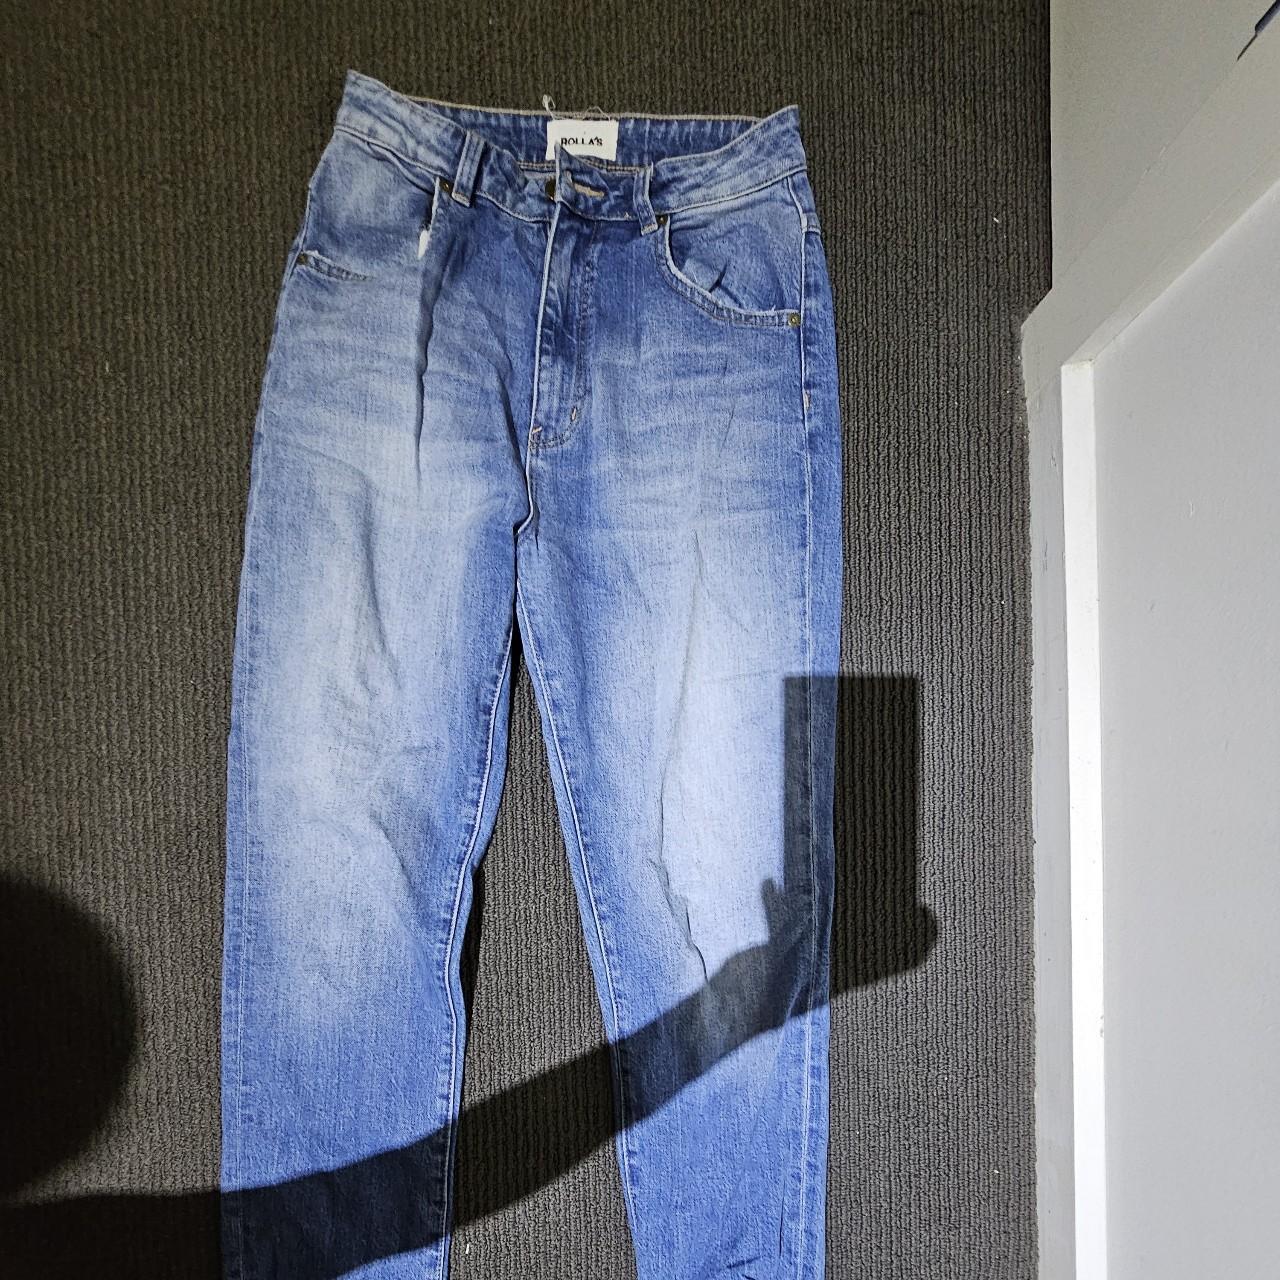 Rollers dusters Jeans In good condition Size Aussie 9 - Depop